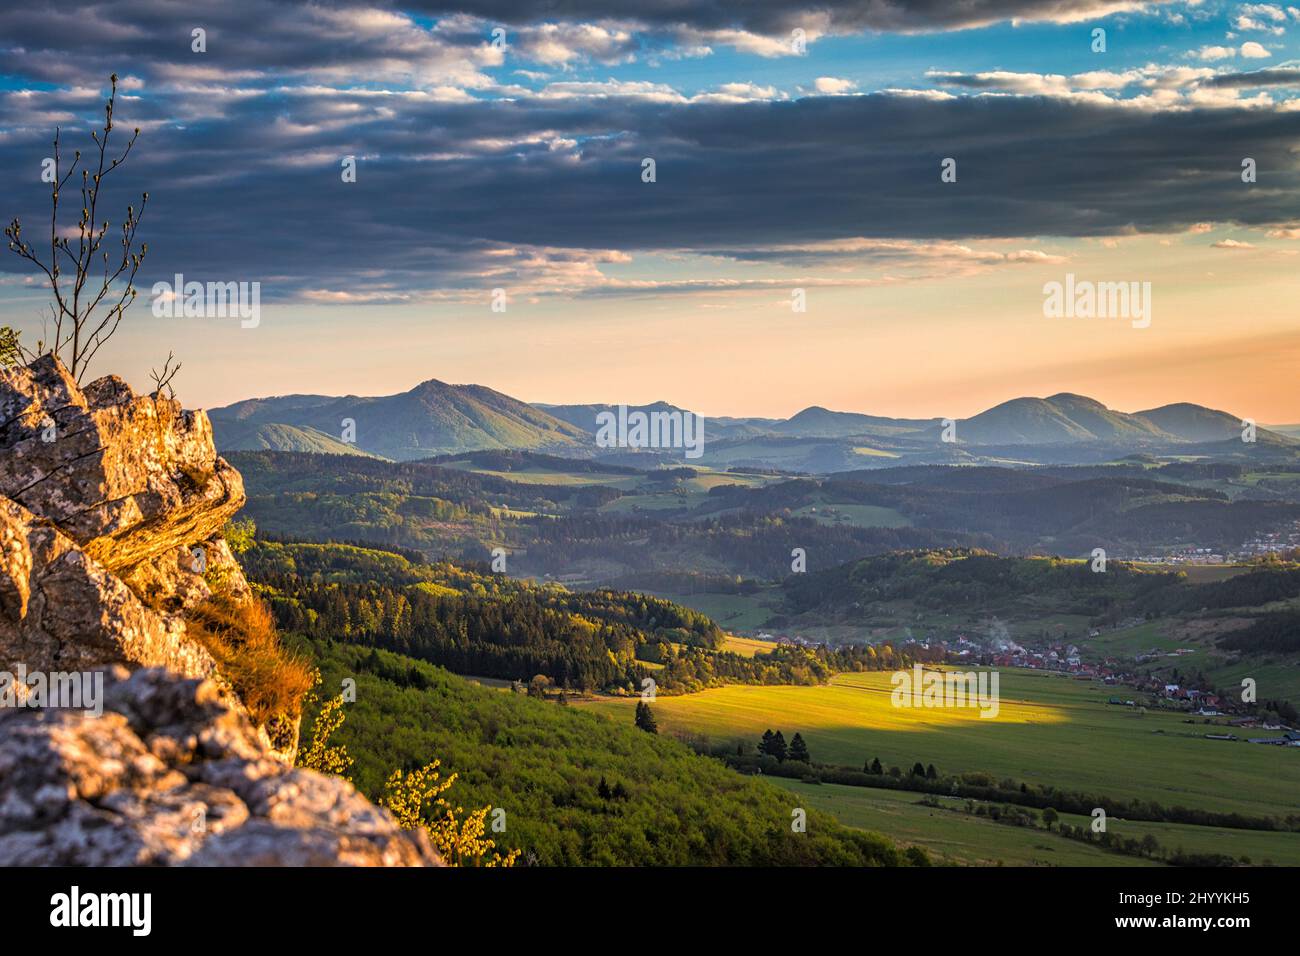 Mountainous landscape at sunset at spring time. View from the top of the Bosmany rocky hill above the Kostolec village in northwestern Slovakia, Europ Stock Photo